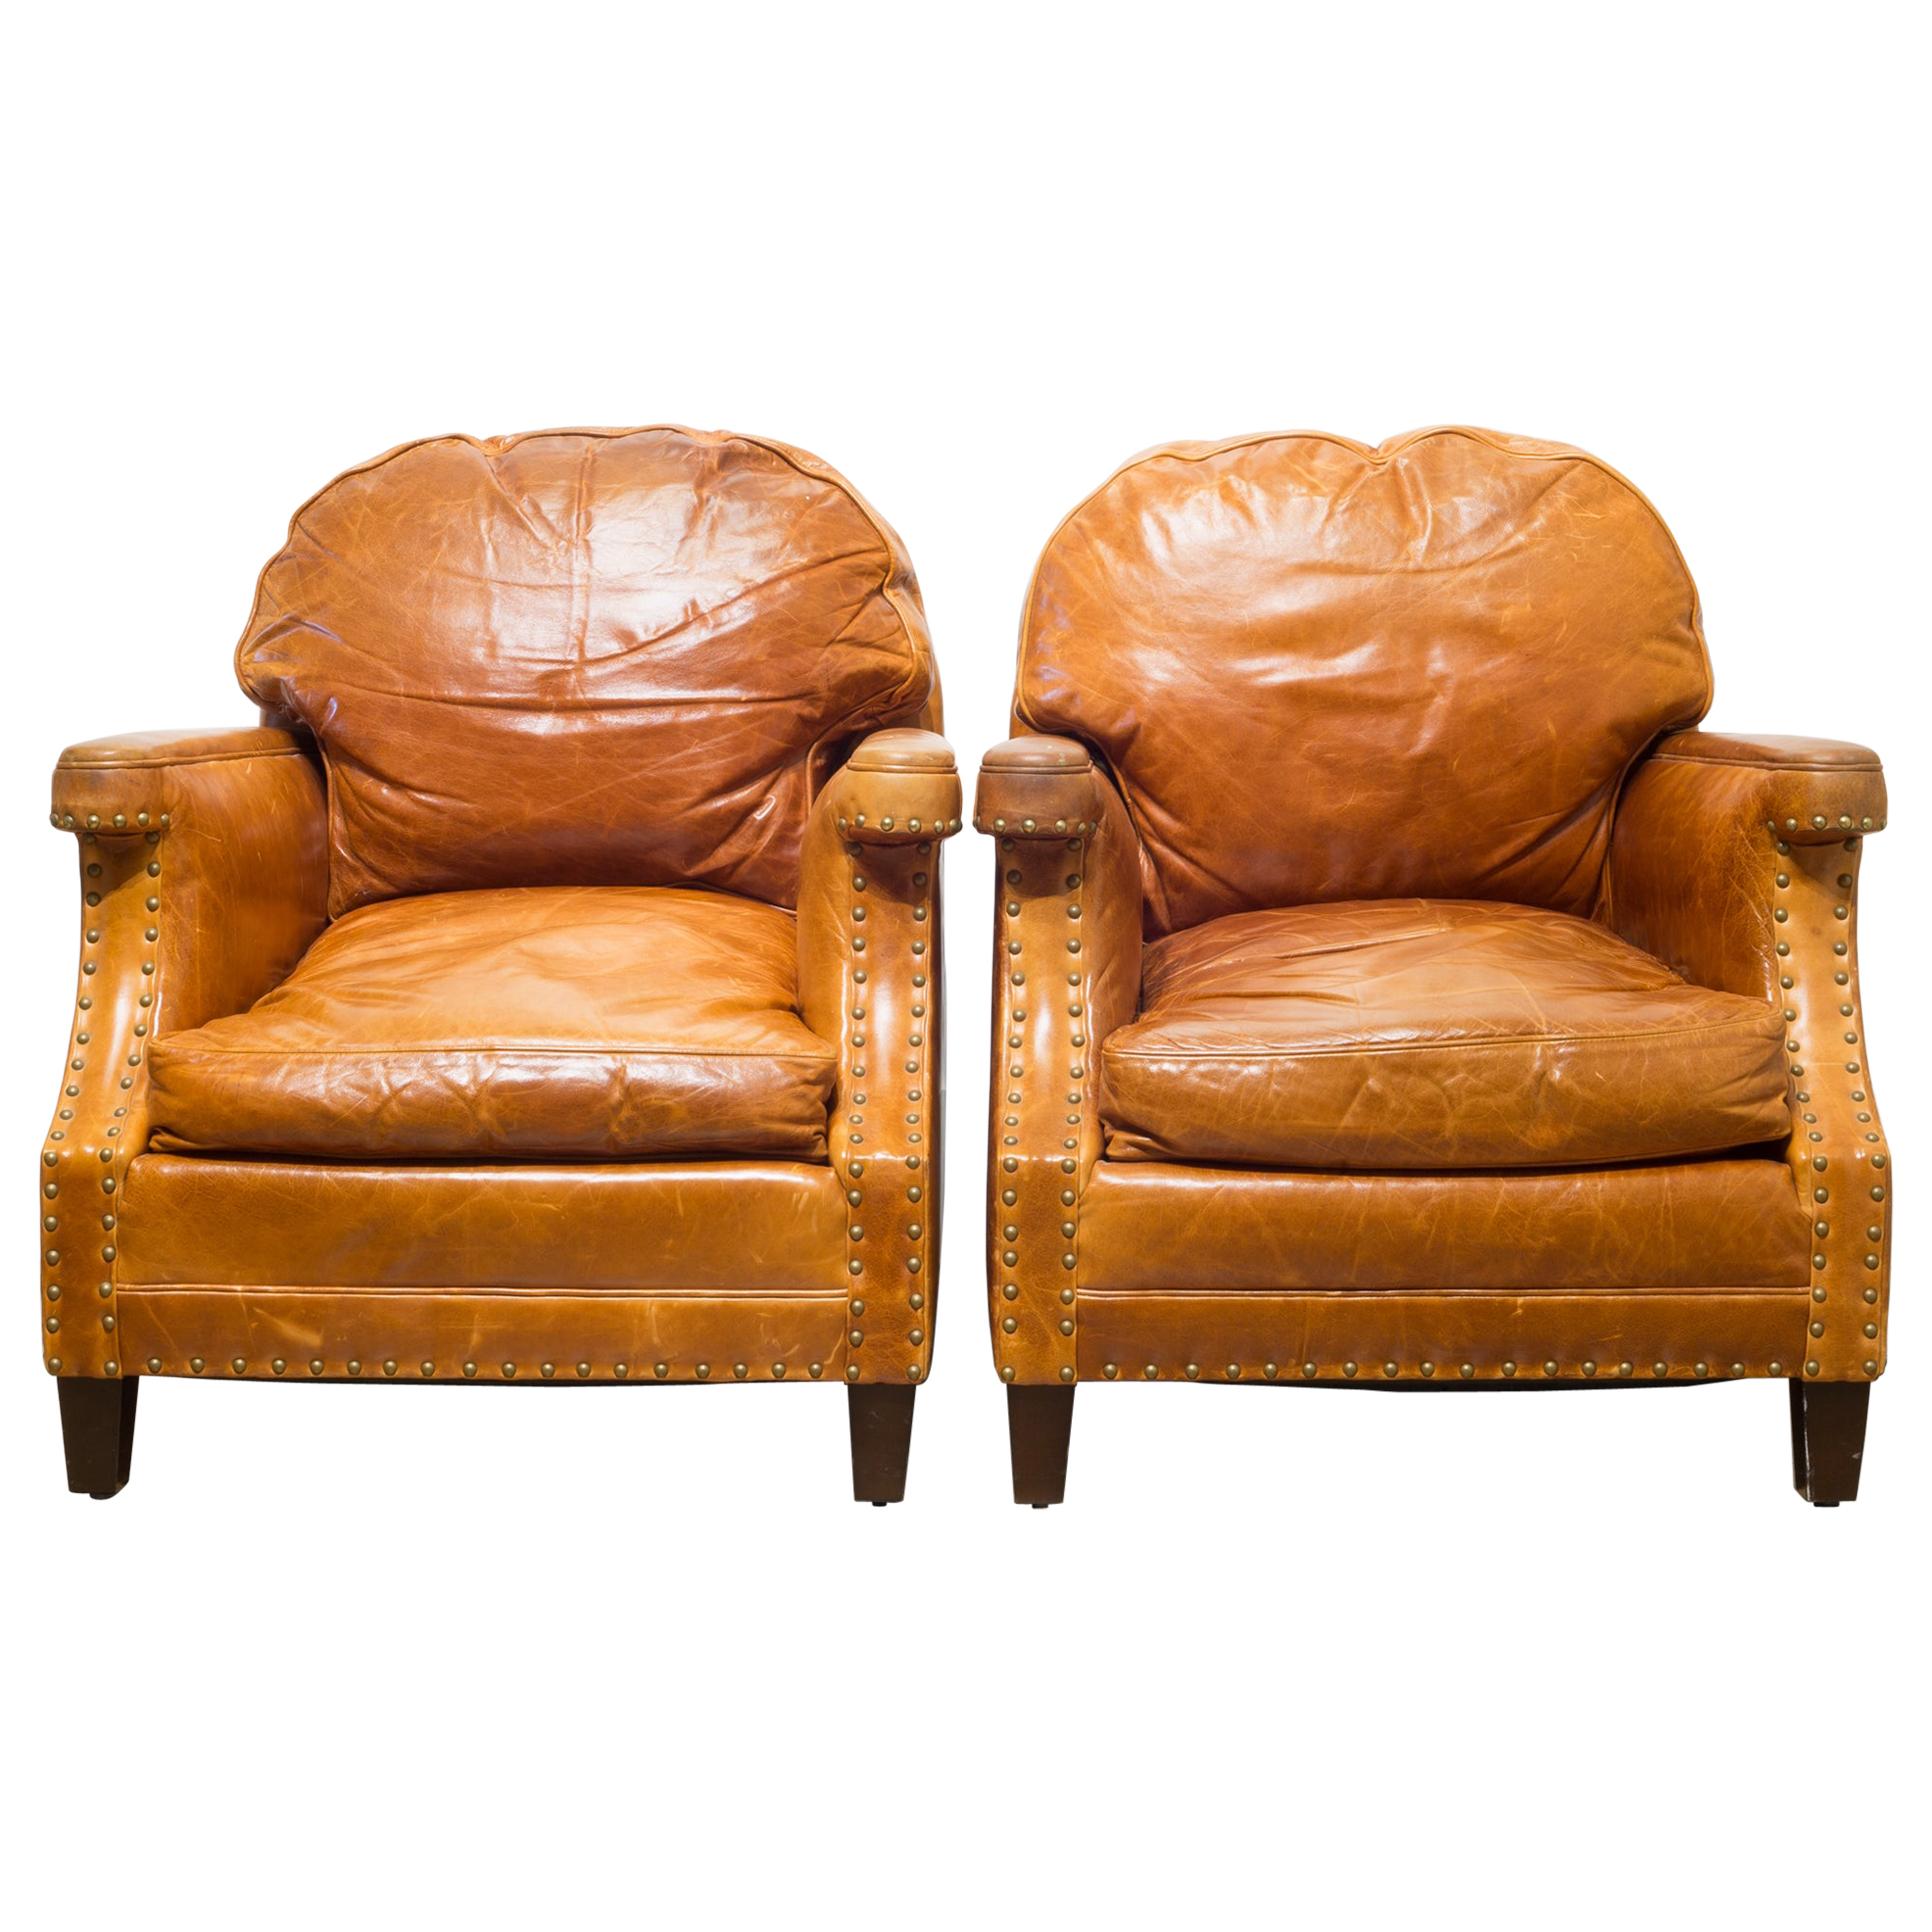 Pair of William-Sonoma Riveted Leather Club Chairs, circa 2007